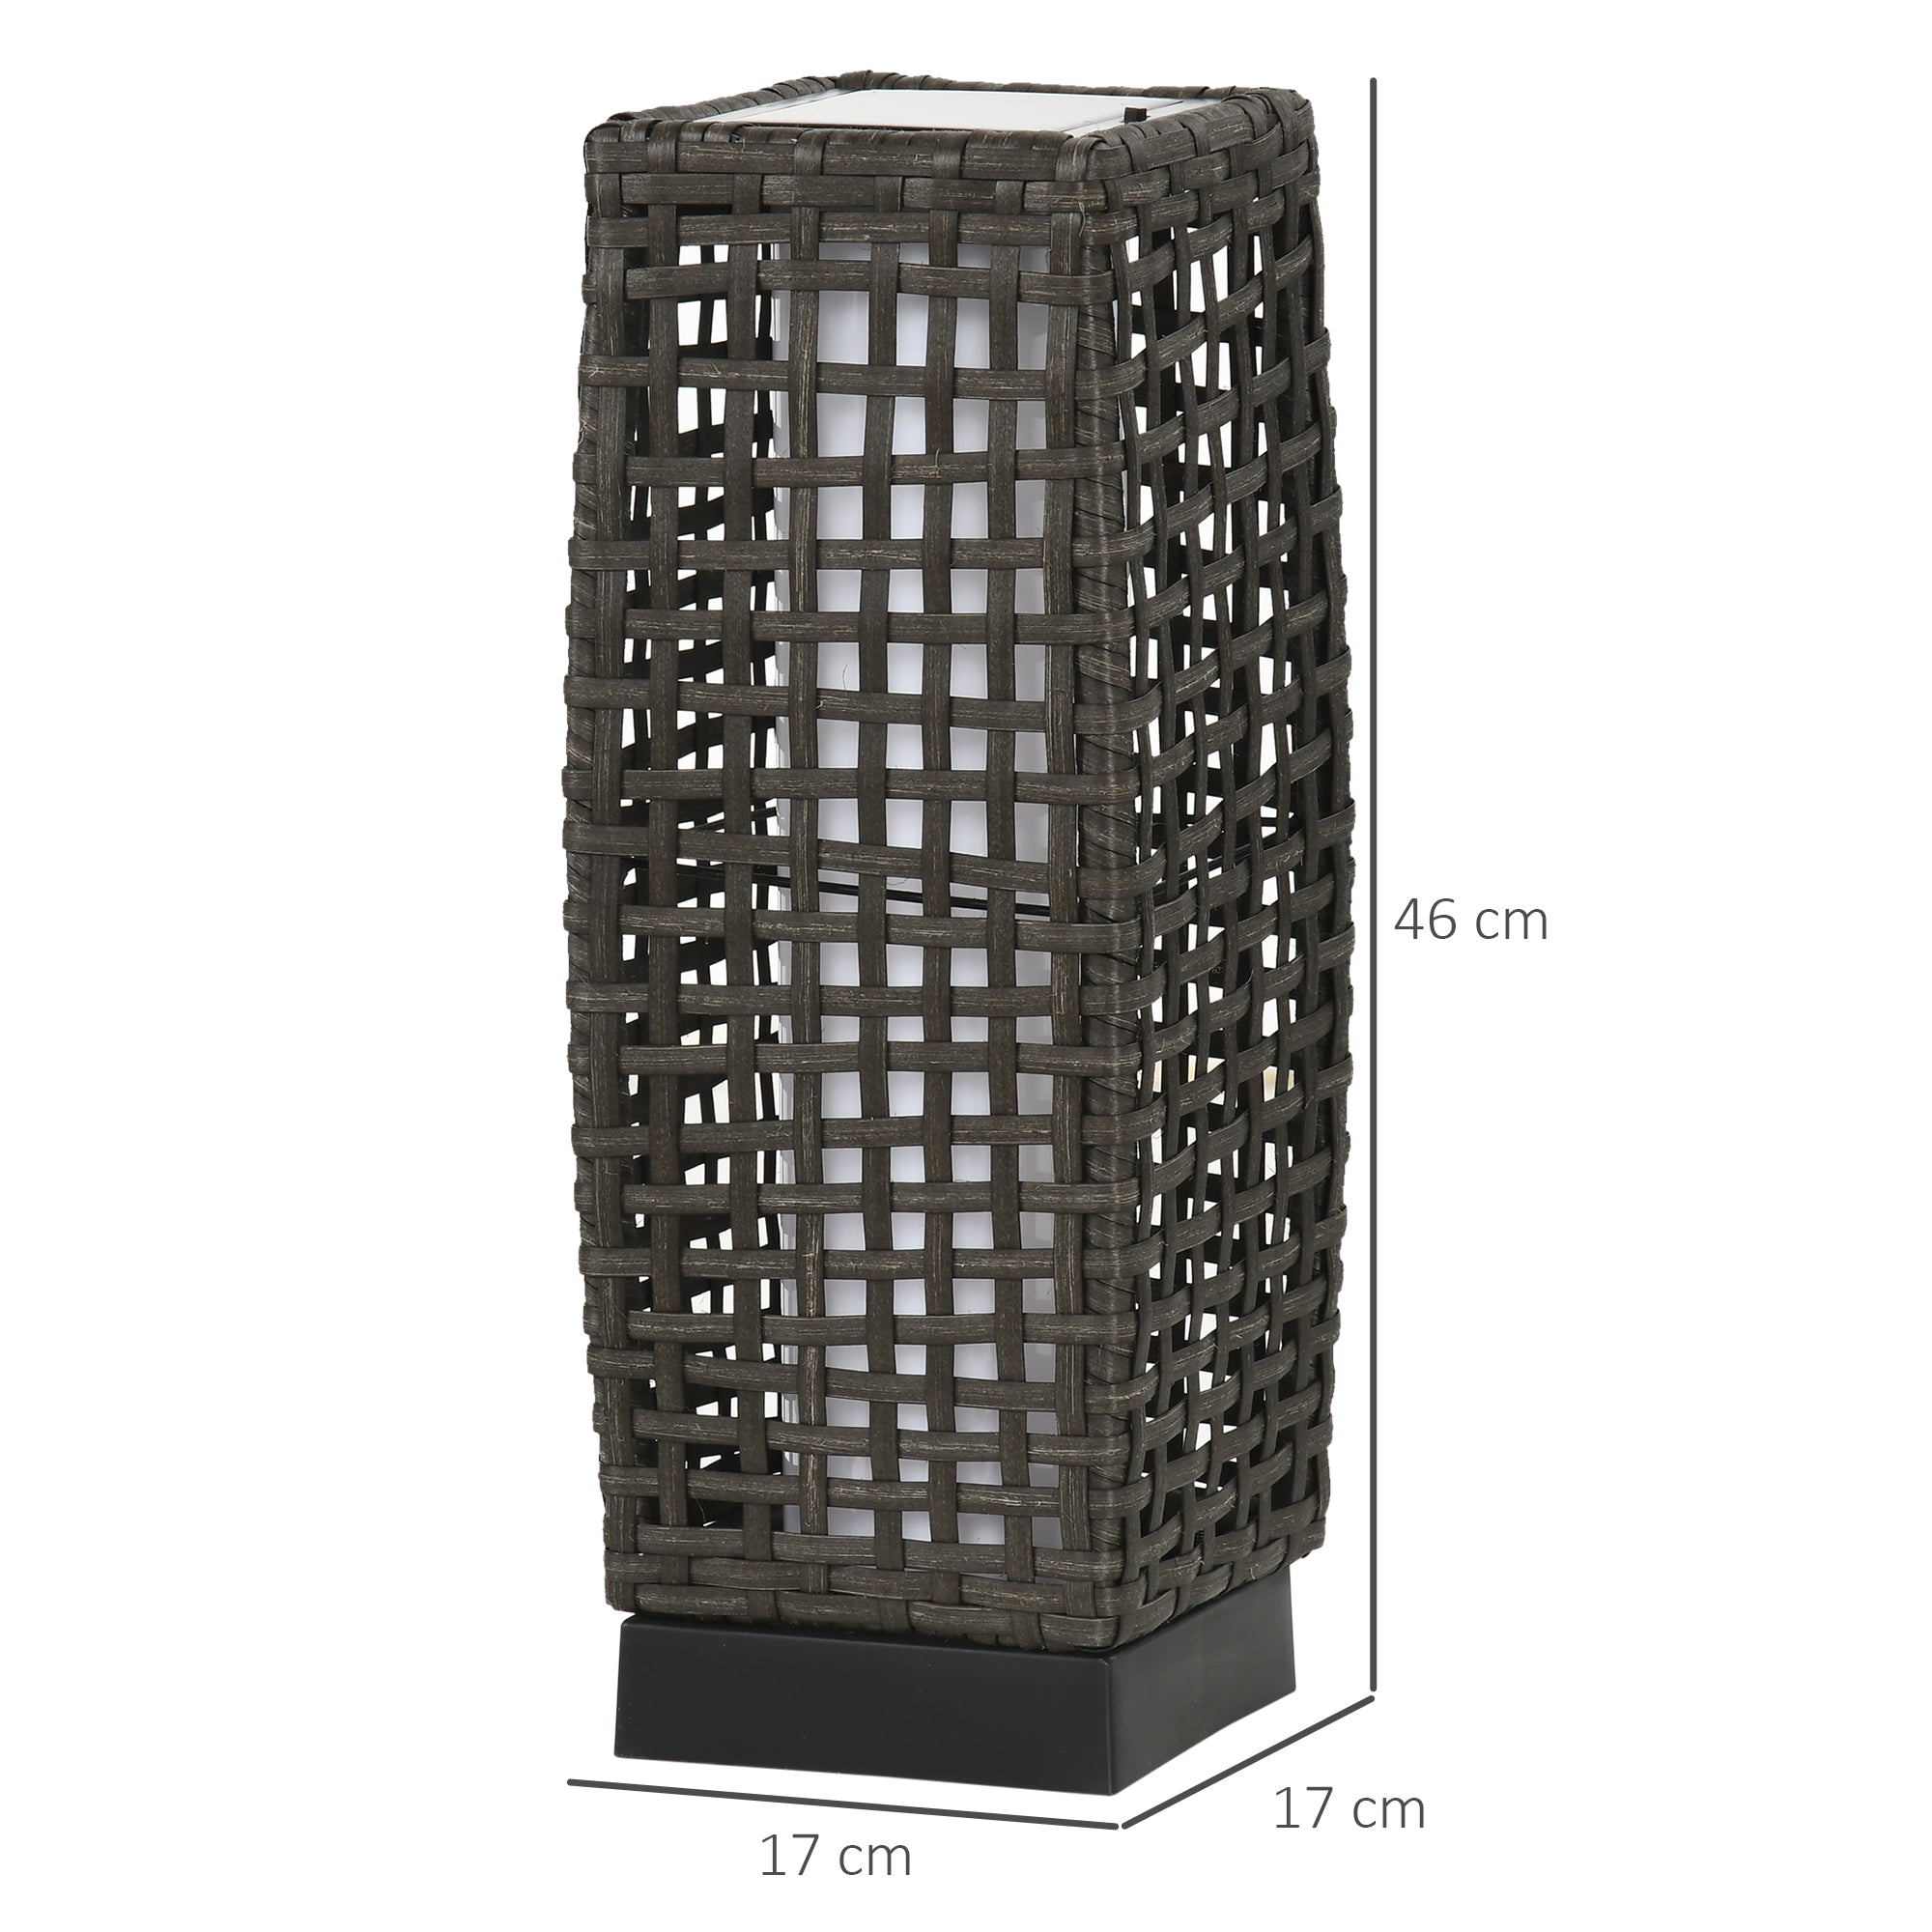 Outsunny Outdoor Rattan Solar Lantern, Brushed PE Wicker Patio Garden Lantern wtih Auto On/Off Solar Powered LED Lights for Indoor & Outdoor Use Grey